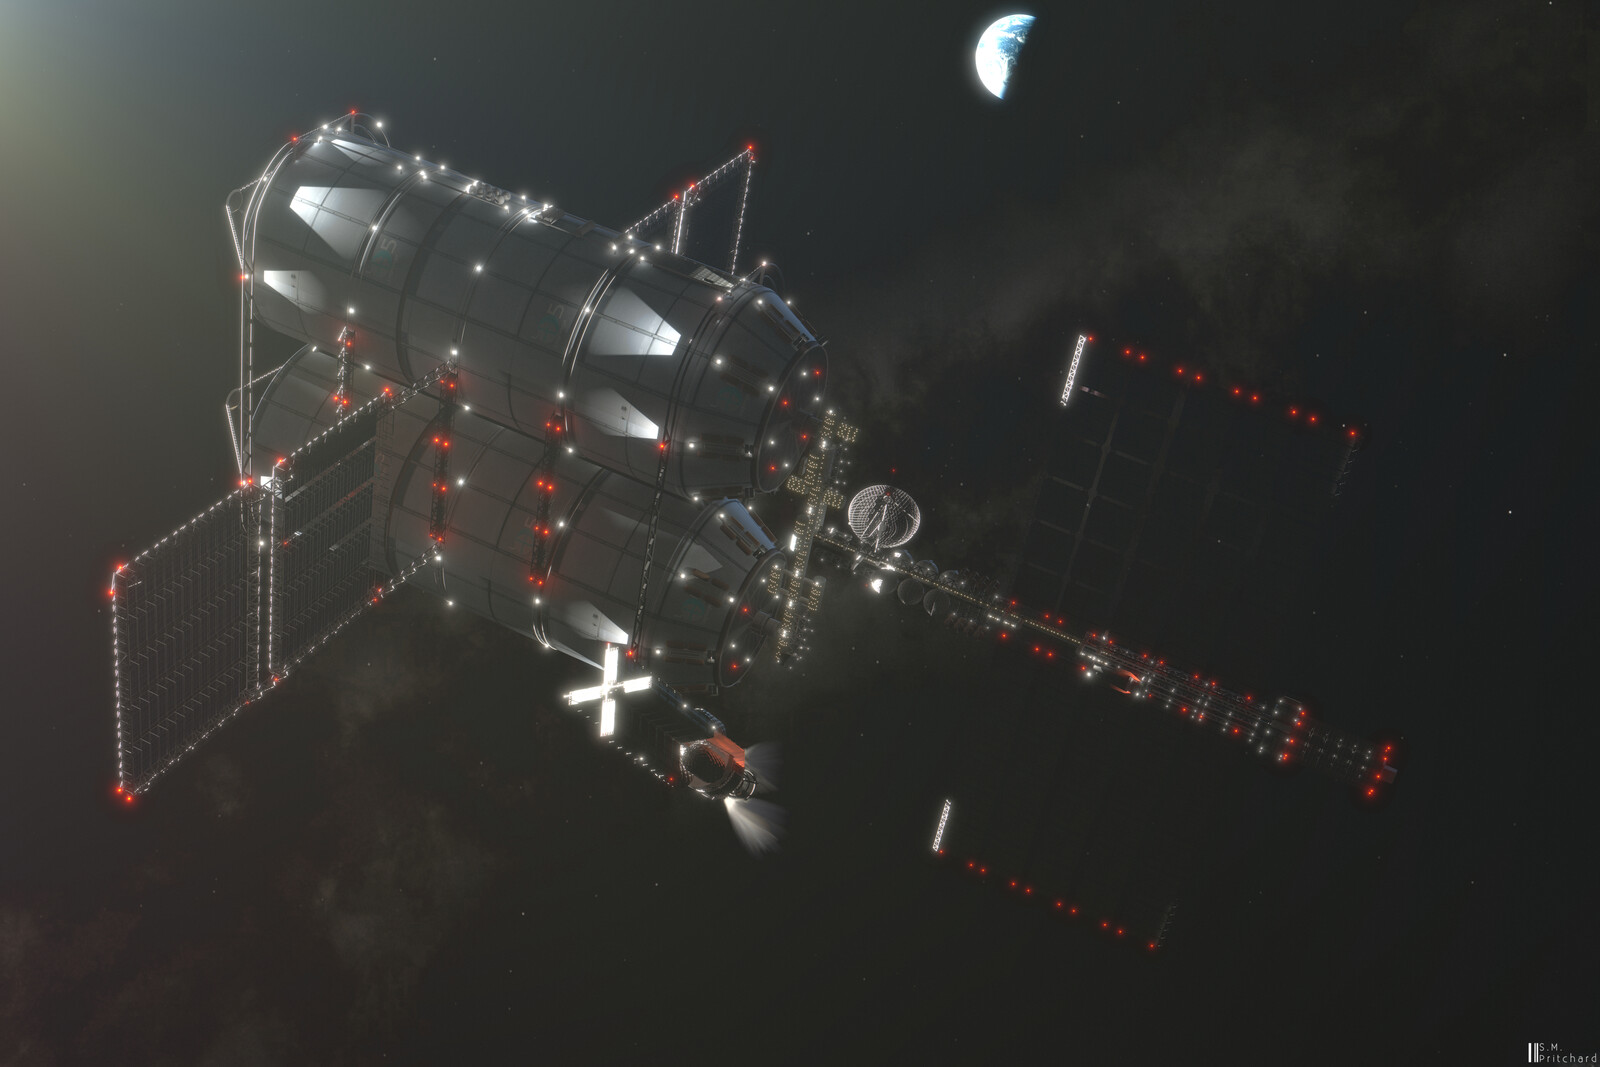 A cargo spacecraft slowly maneuvers itself towards a docking cradle along the massive spinal truss.